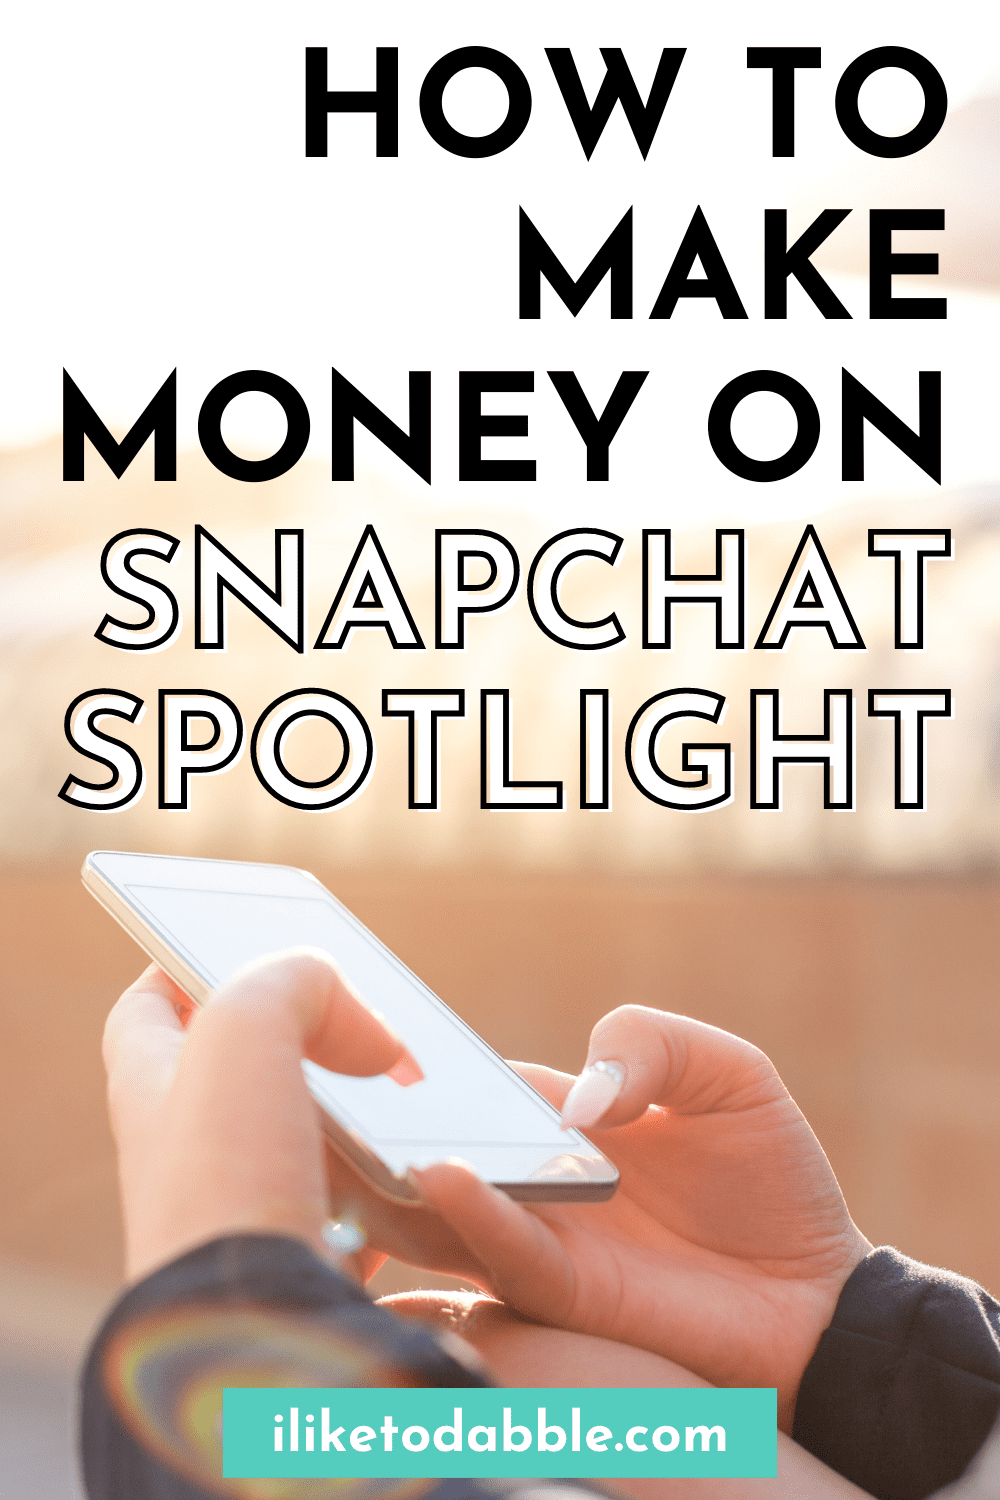 how to make money on snapchat pinnable image (1)